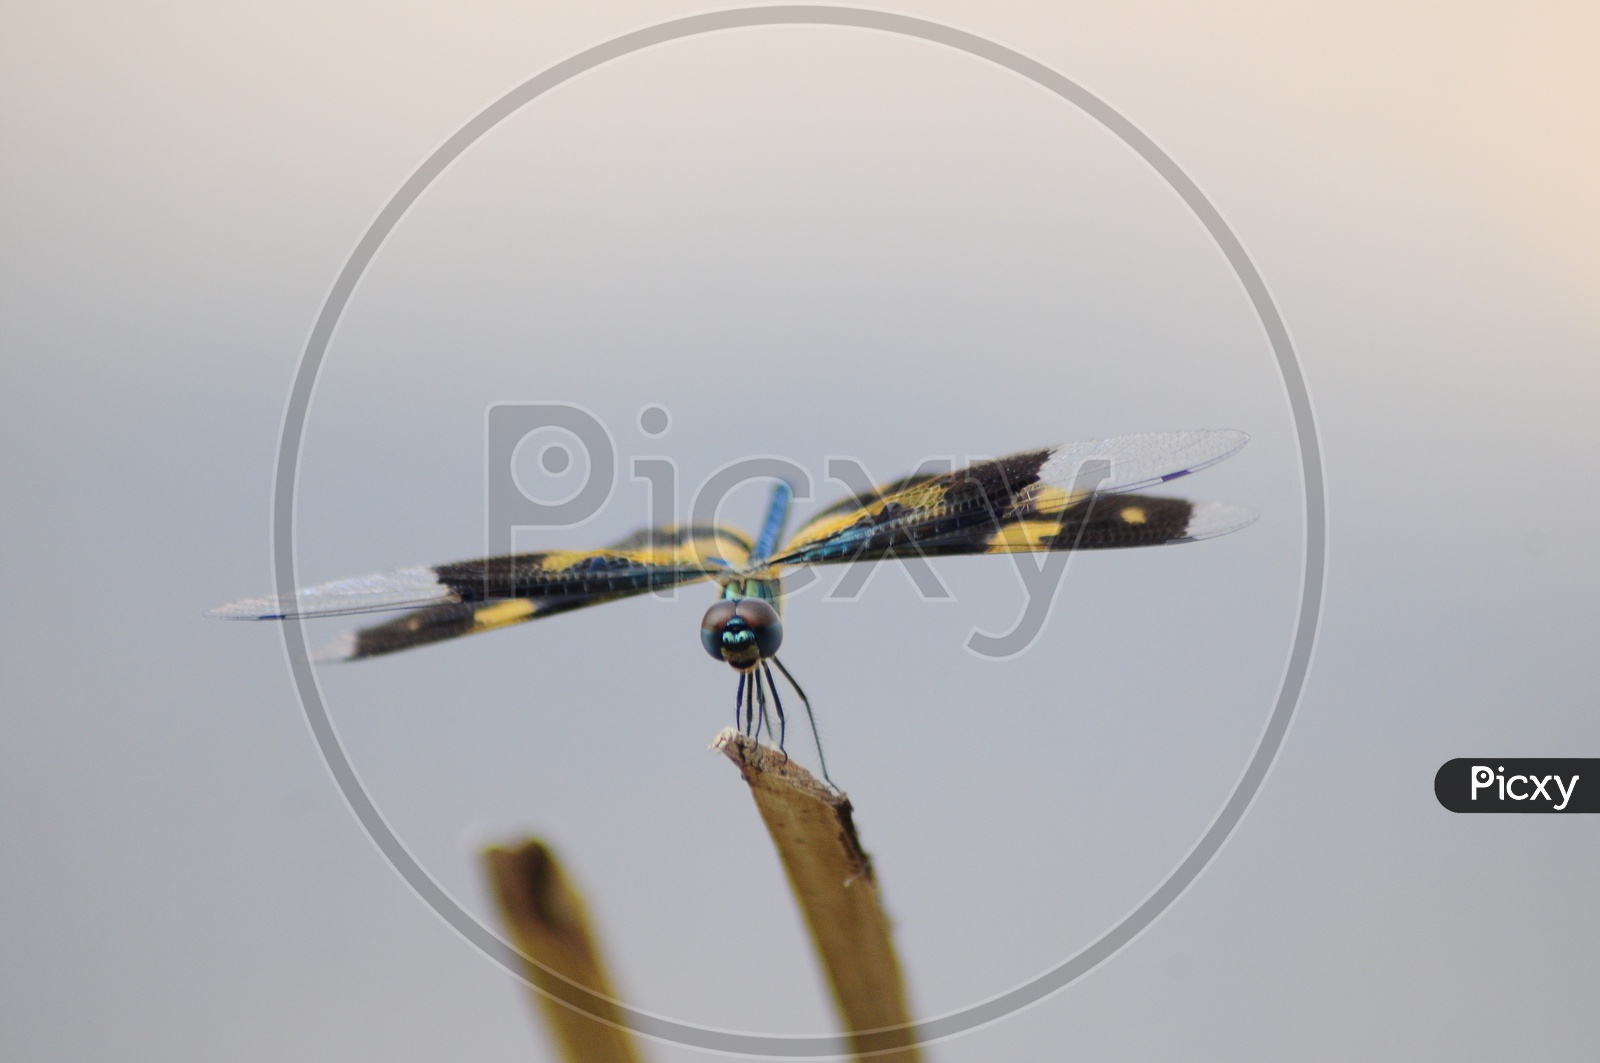 A Close up of Dragonfly